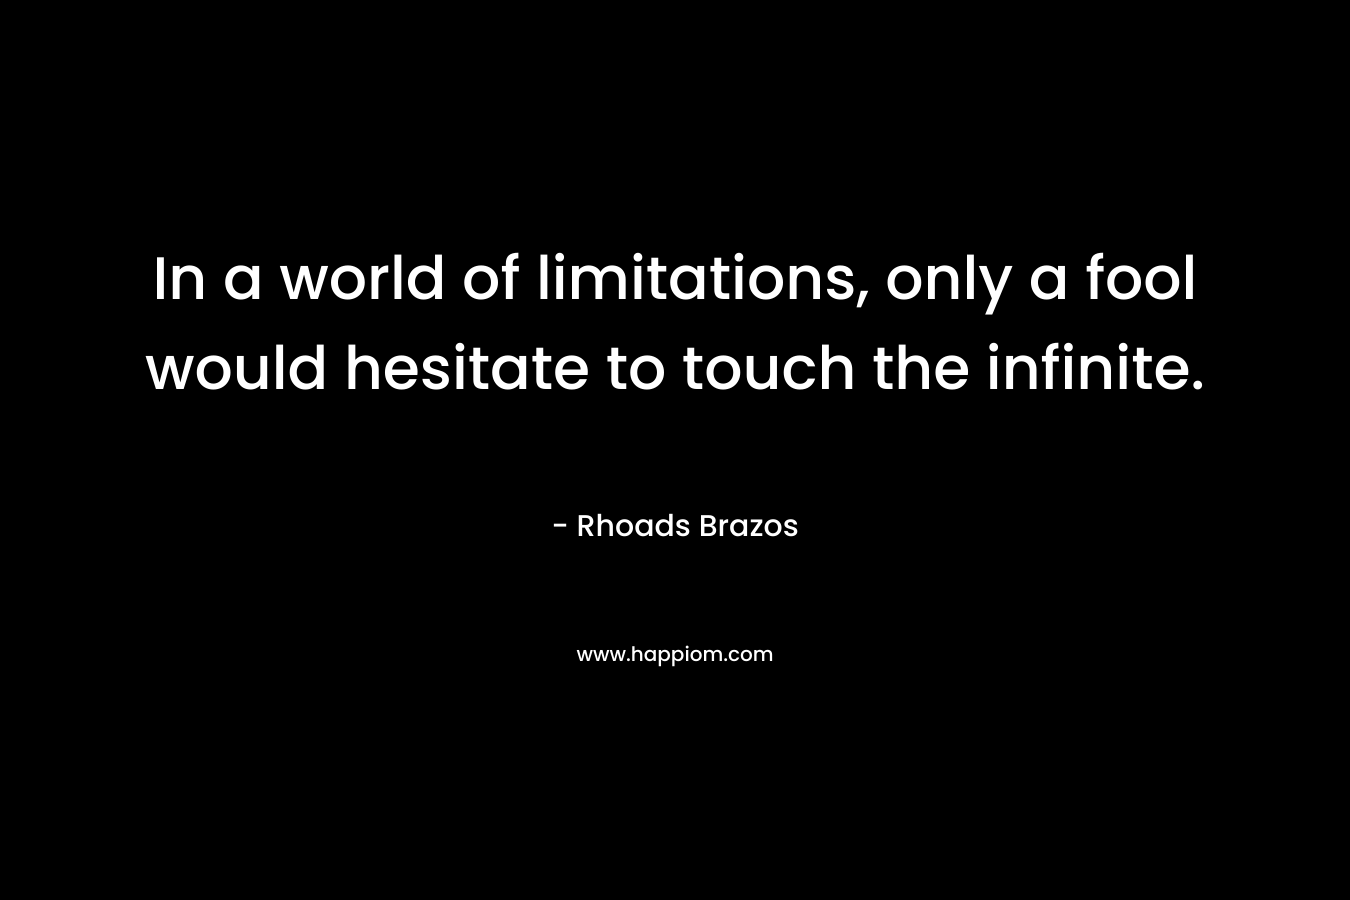 In a world of limitations, only a fool would hesitate to touch the infinite. – Rhoads Brazos